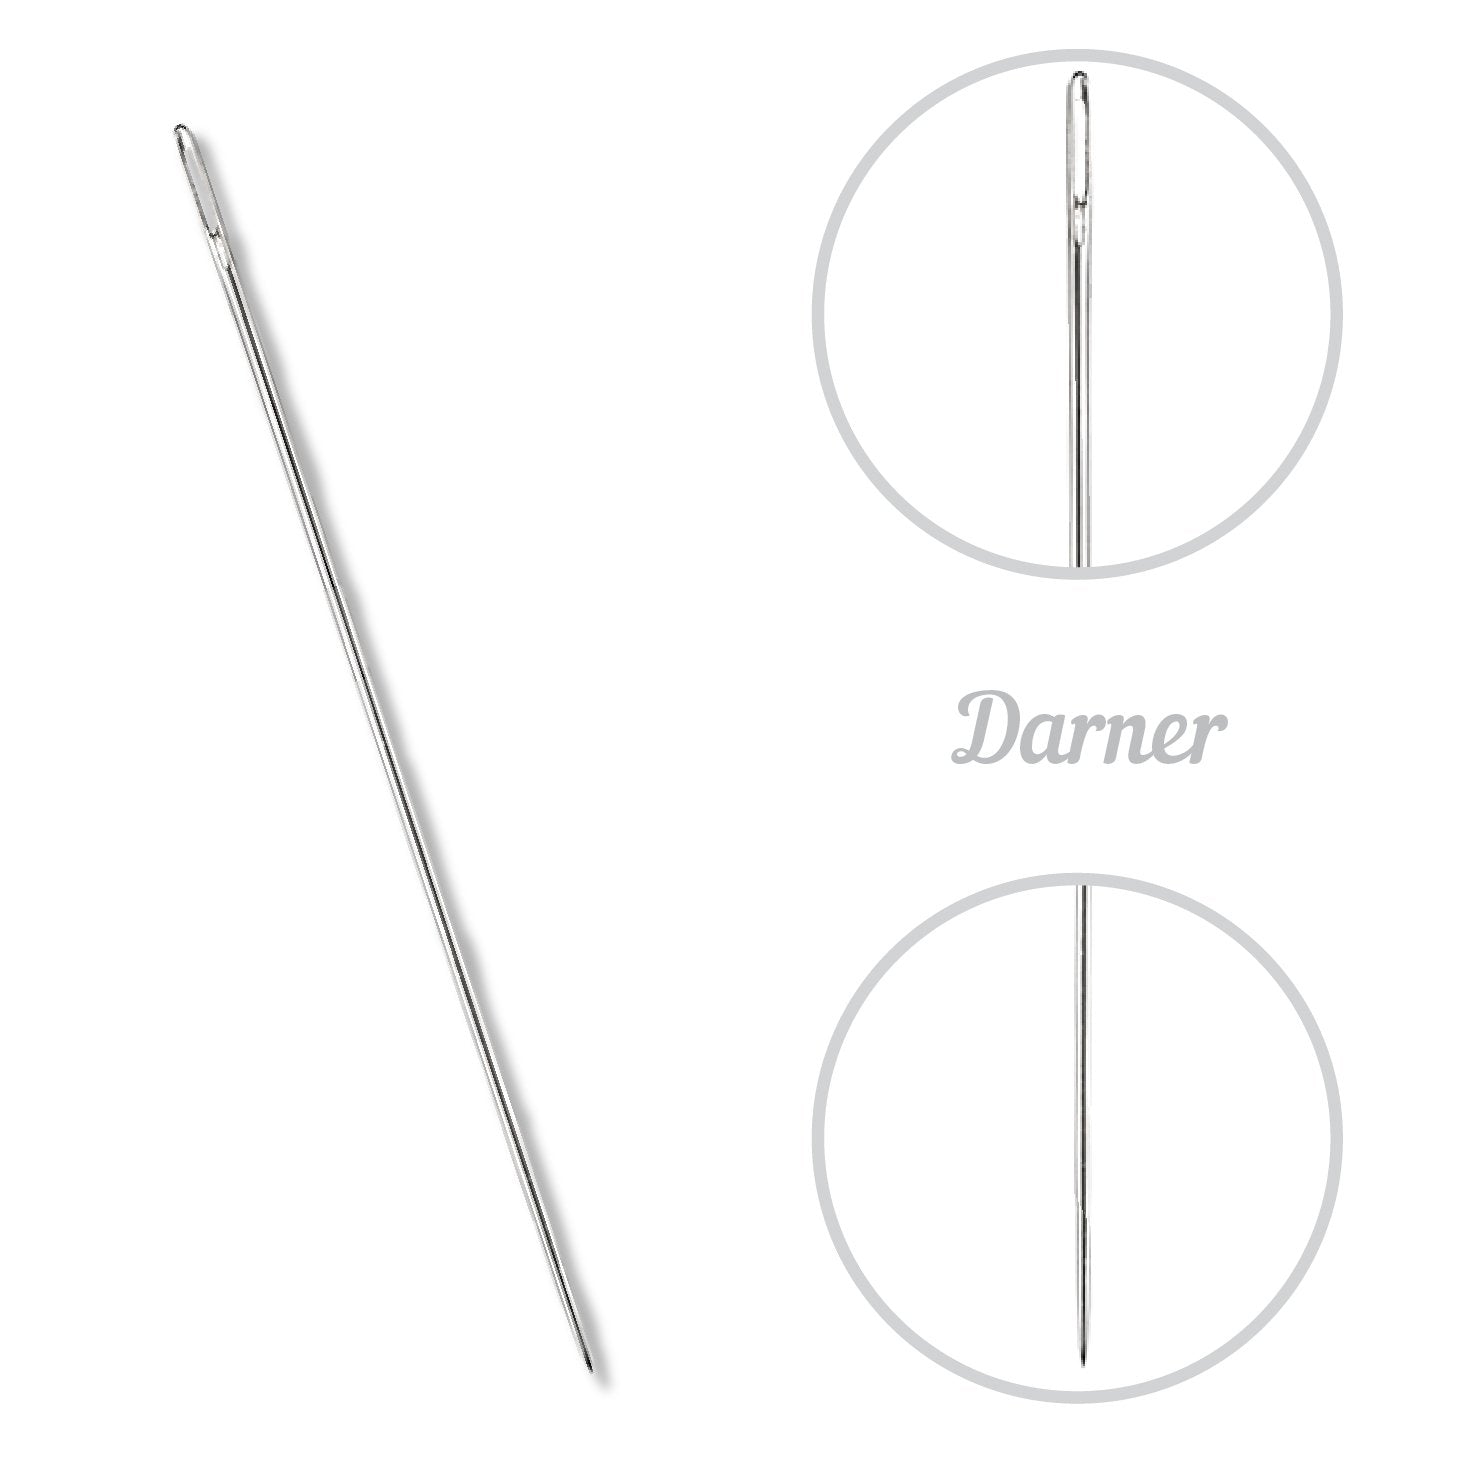 CN - Colonial Needle -Darners - Assortment - #01 - #05